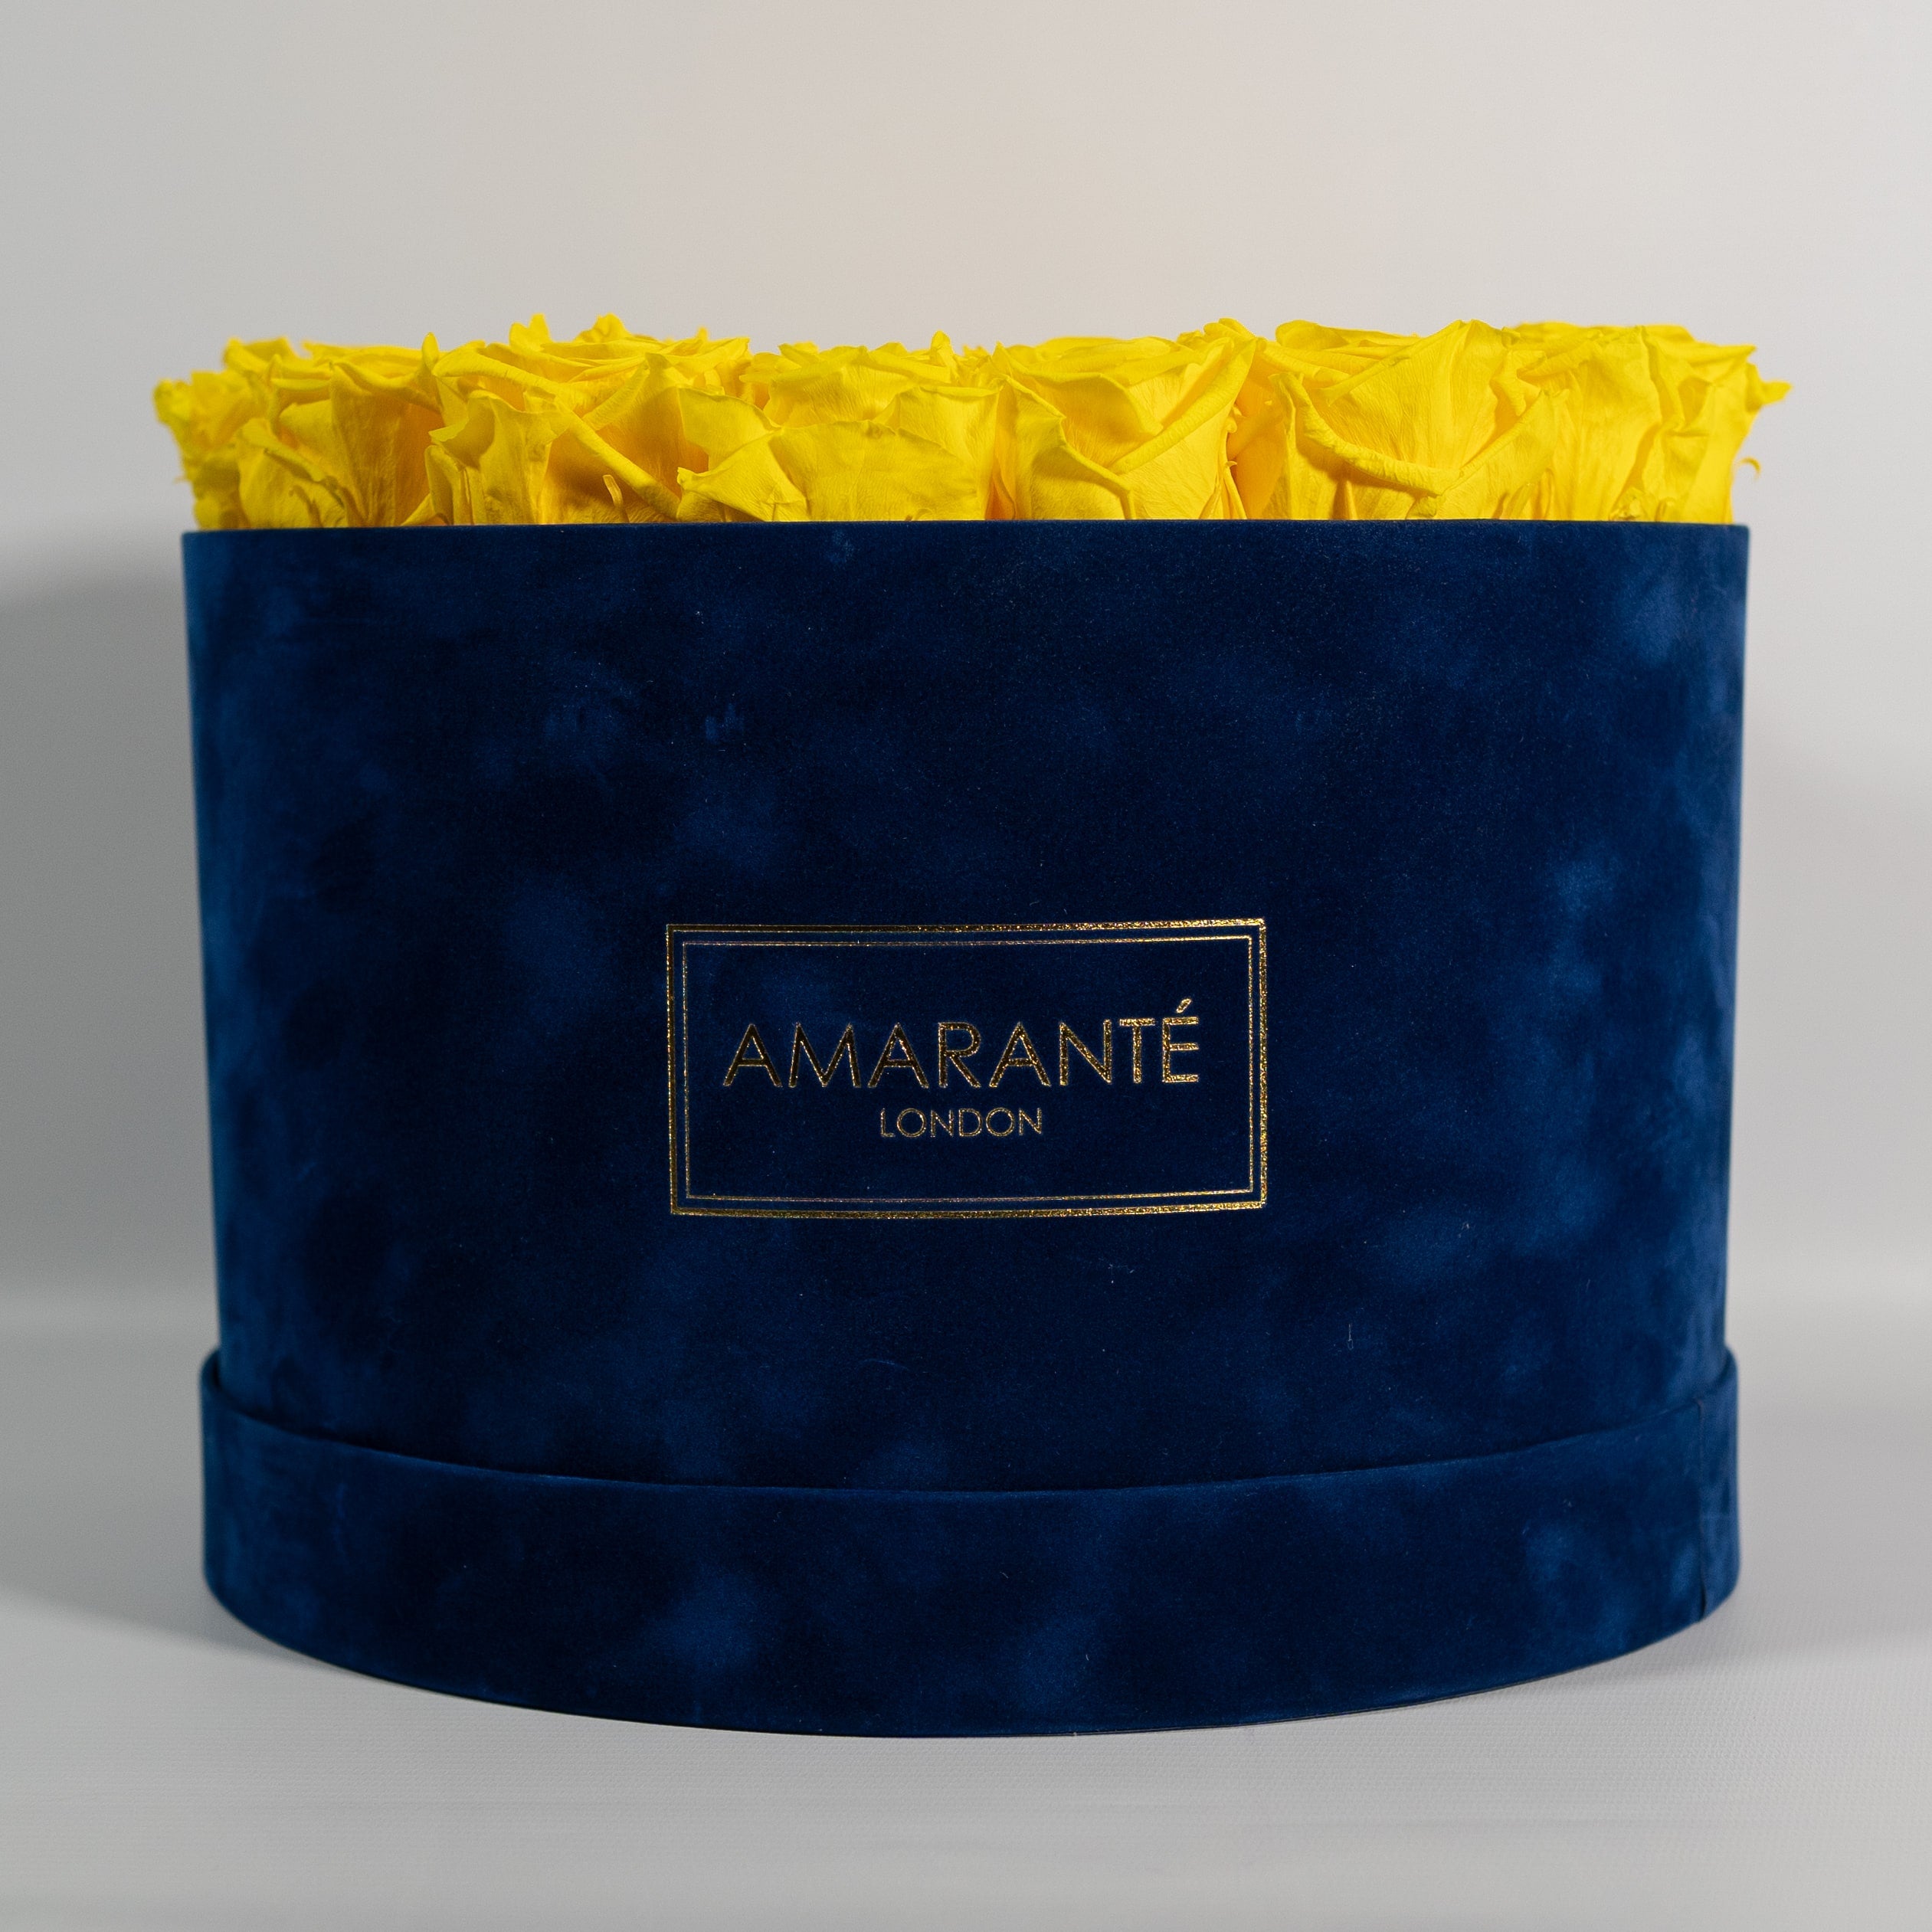 Summer inspired yellow roses available in a classic blue box.